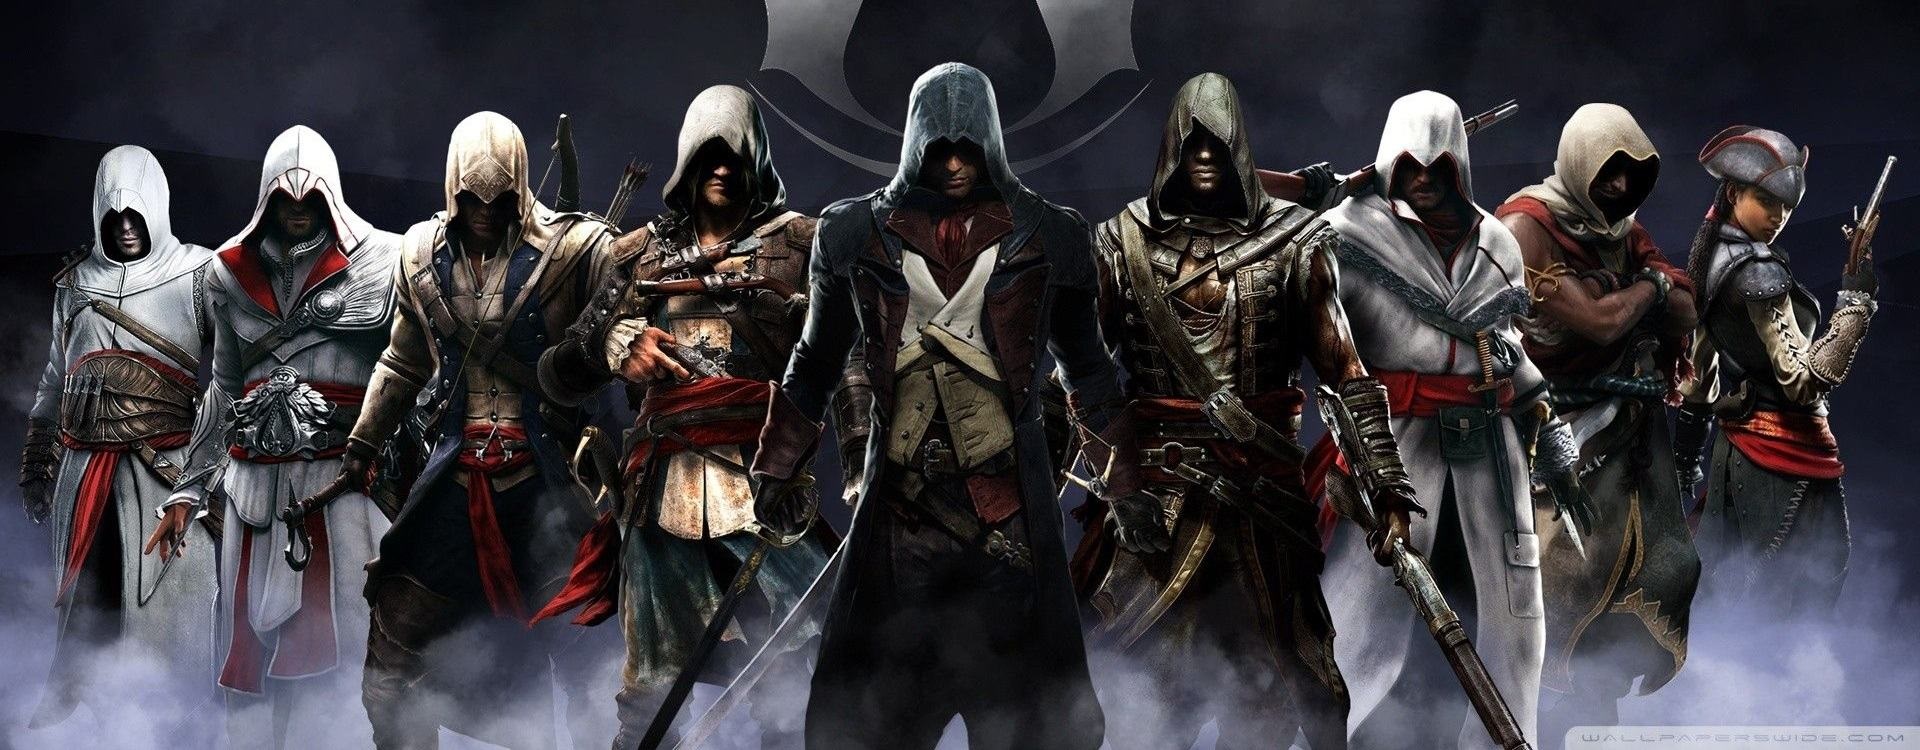 Assassin's Creed Infinity; wallpaper: cover